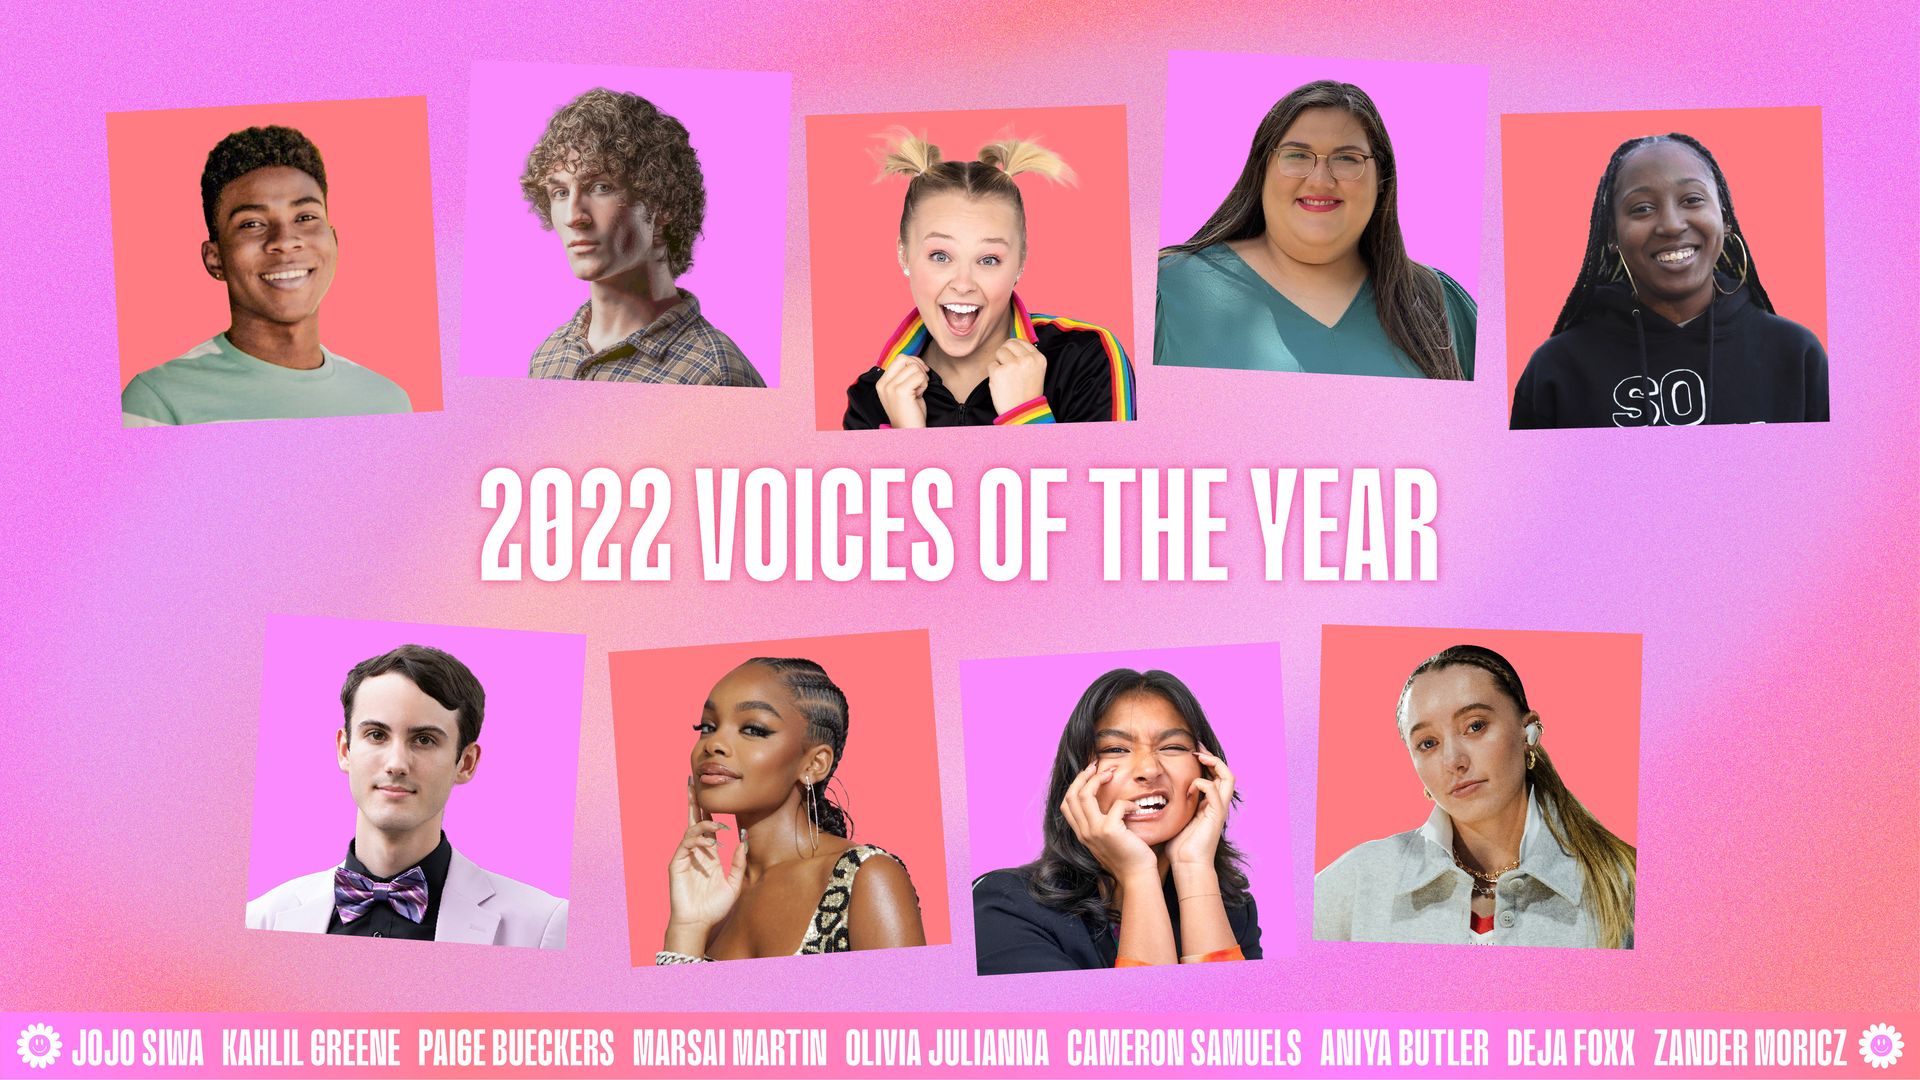 seventeen 2022 voices of the year